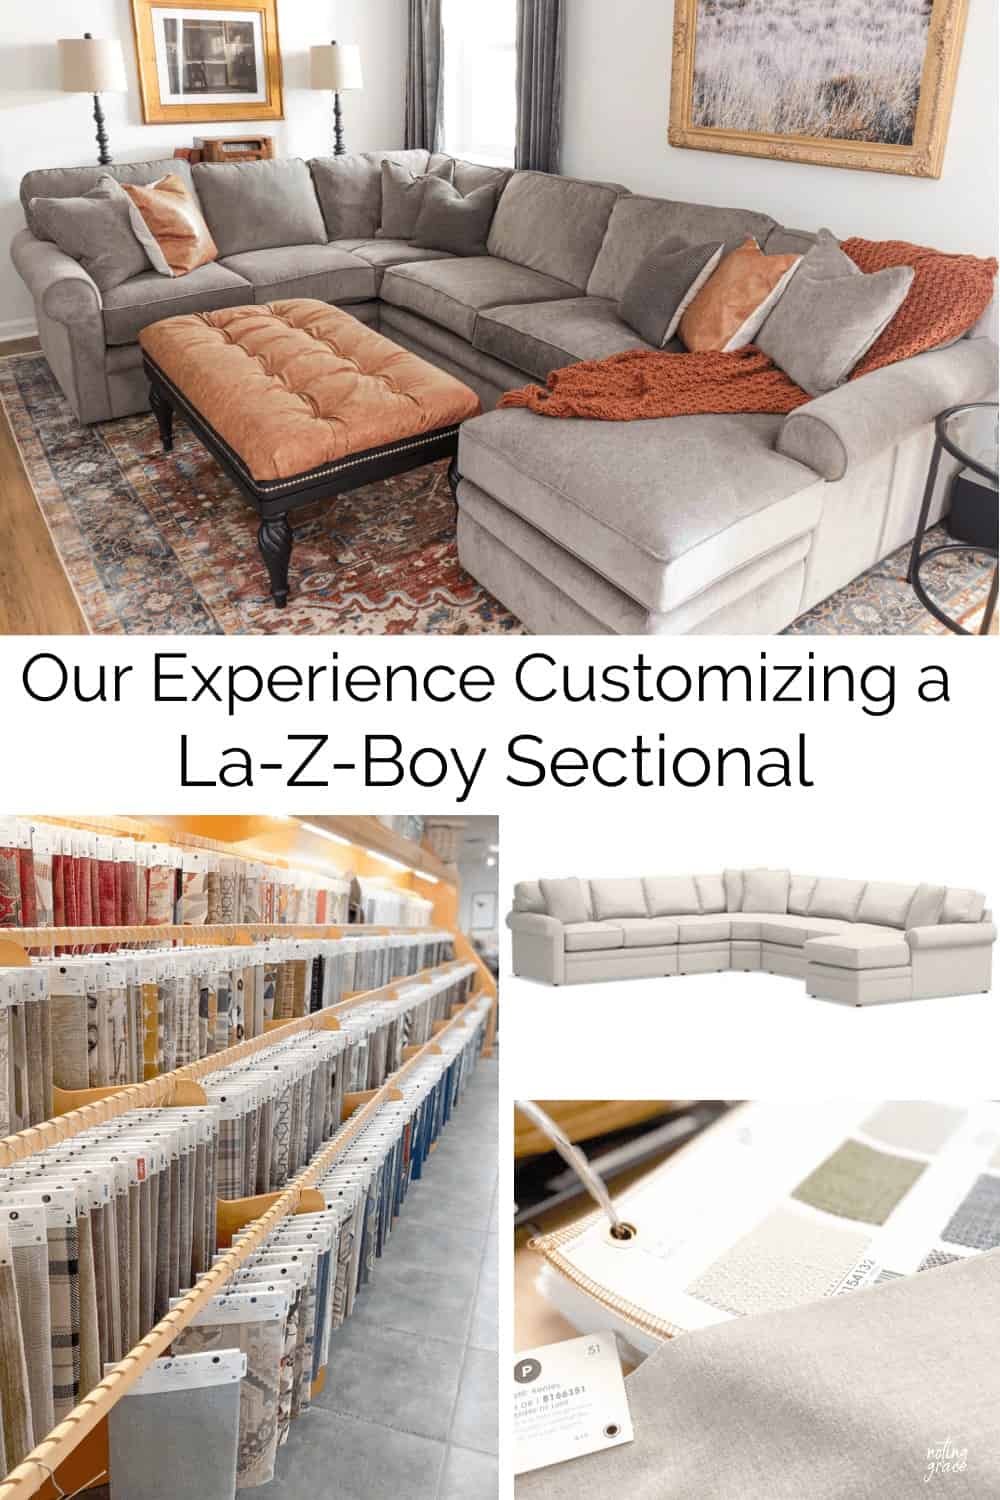 Our experience customizing a la-z-boy collins sectional